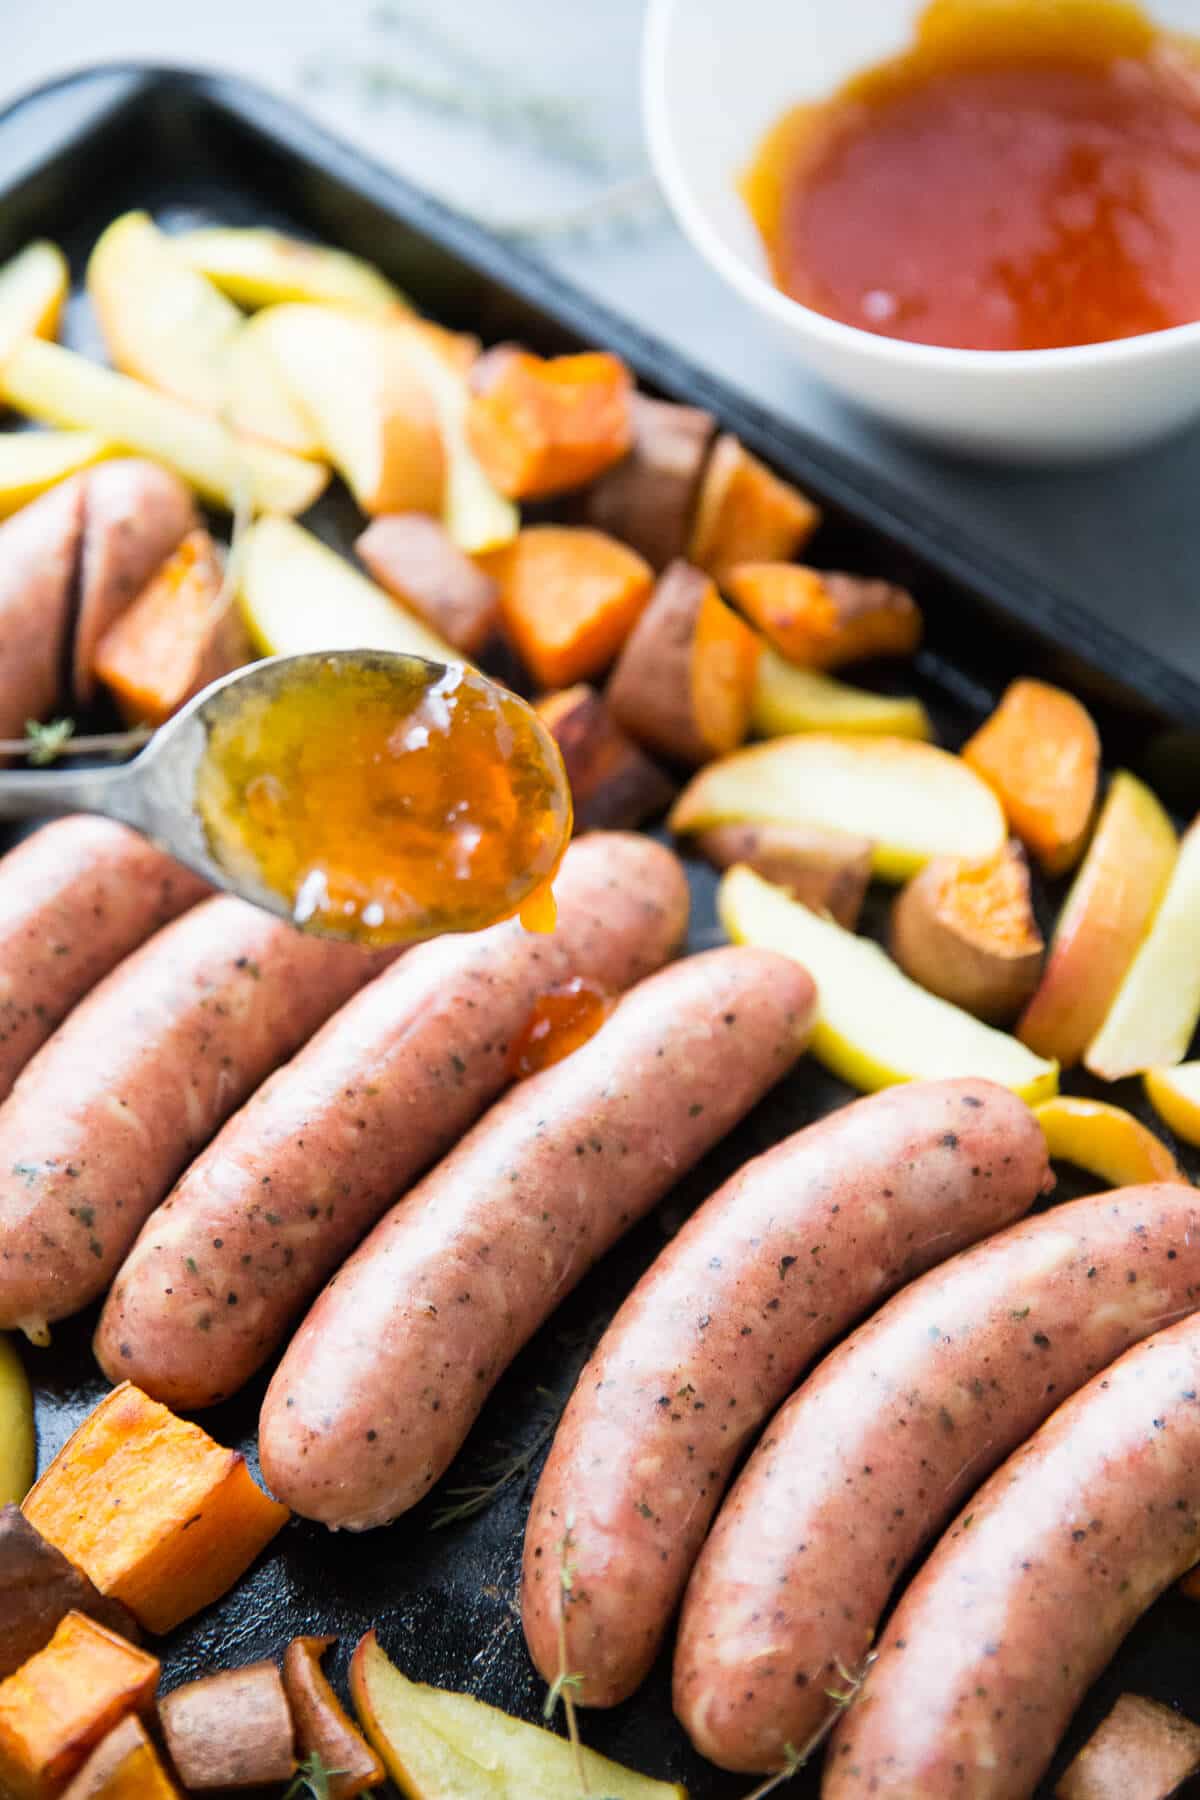 This sheet pan sausage dinner is inspired by the flavors of fall.  Cheesy sausage is baked along side sweet potatoes, apples and a simple apricot glaze!